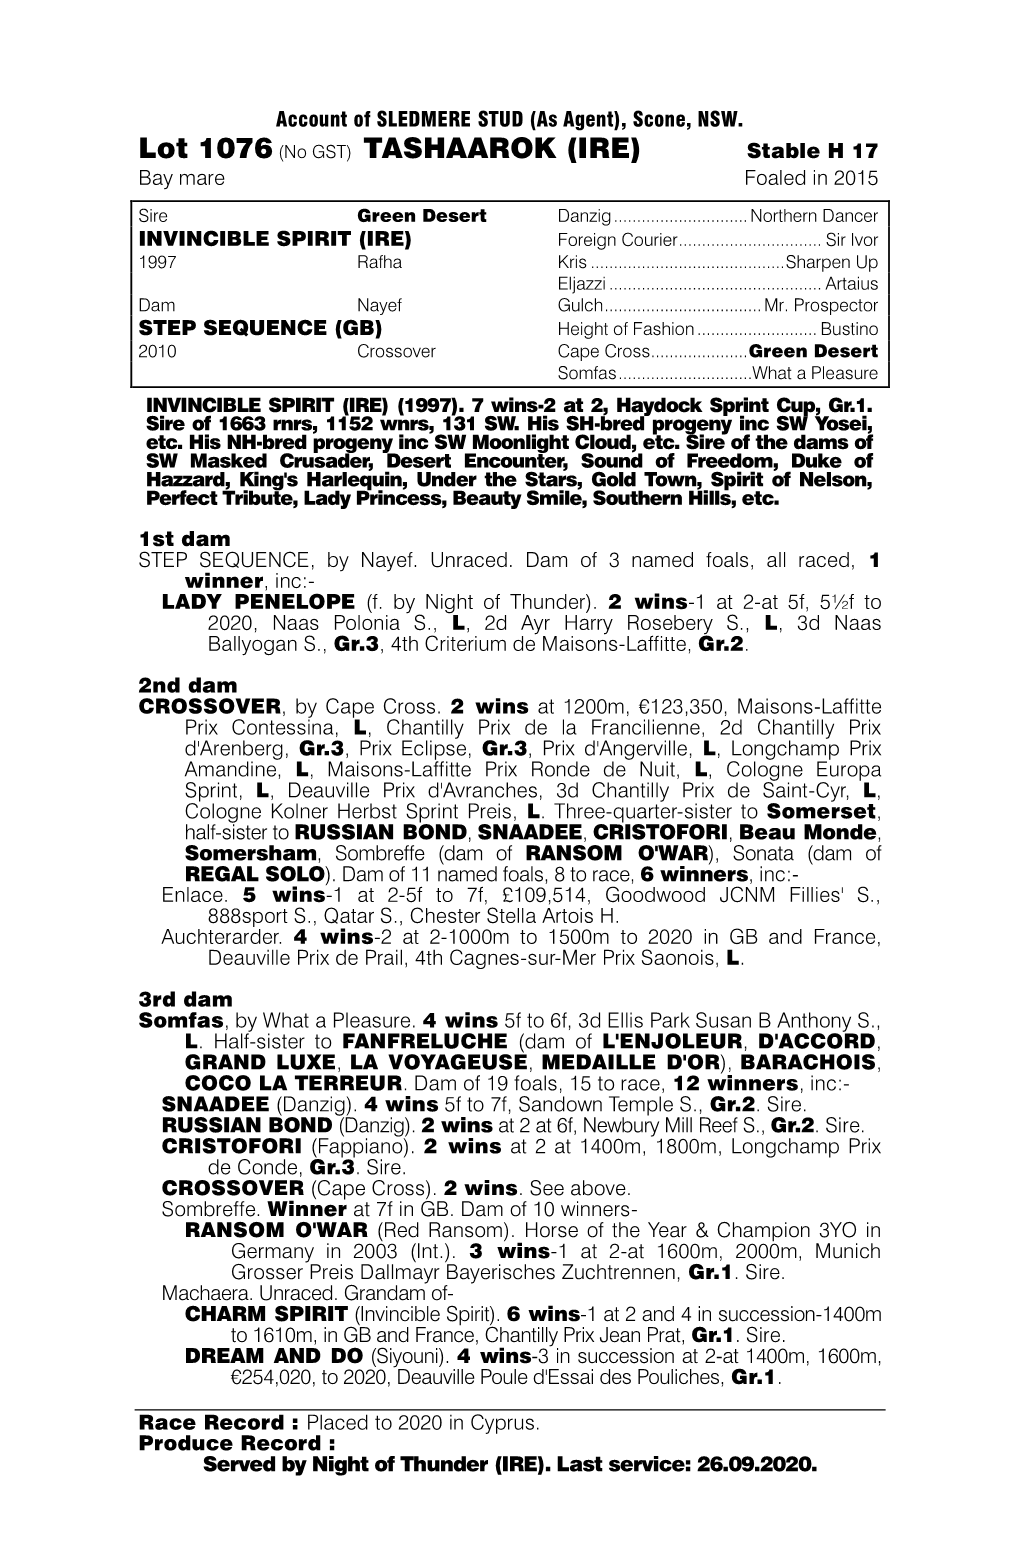 Lot 1076 (No GST) TASHAAROK (IRE) Stable H 17 Bay Mare Foaled in 2015